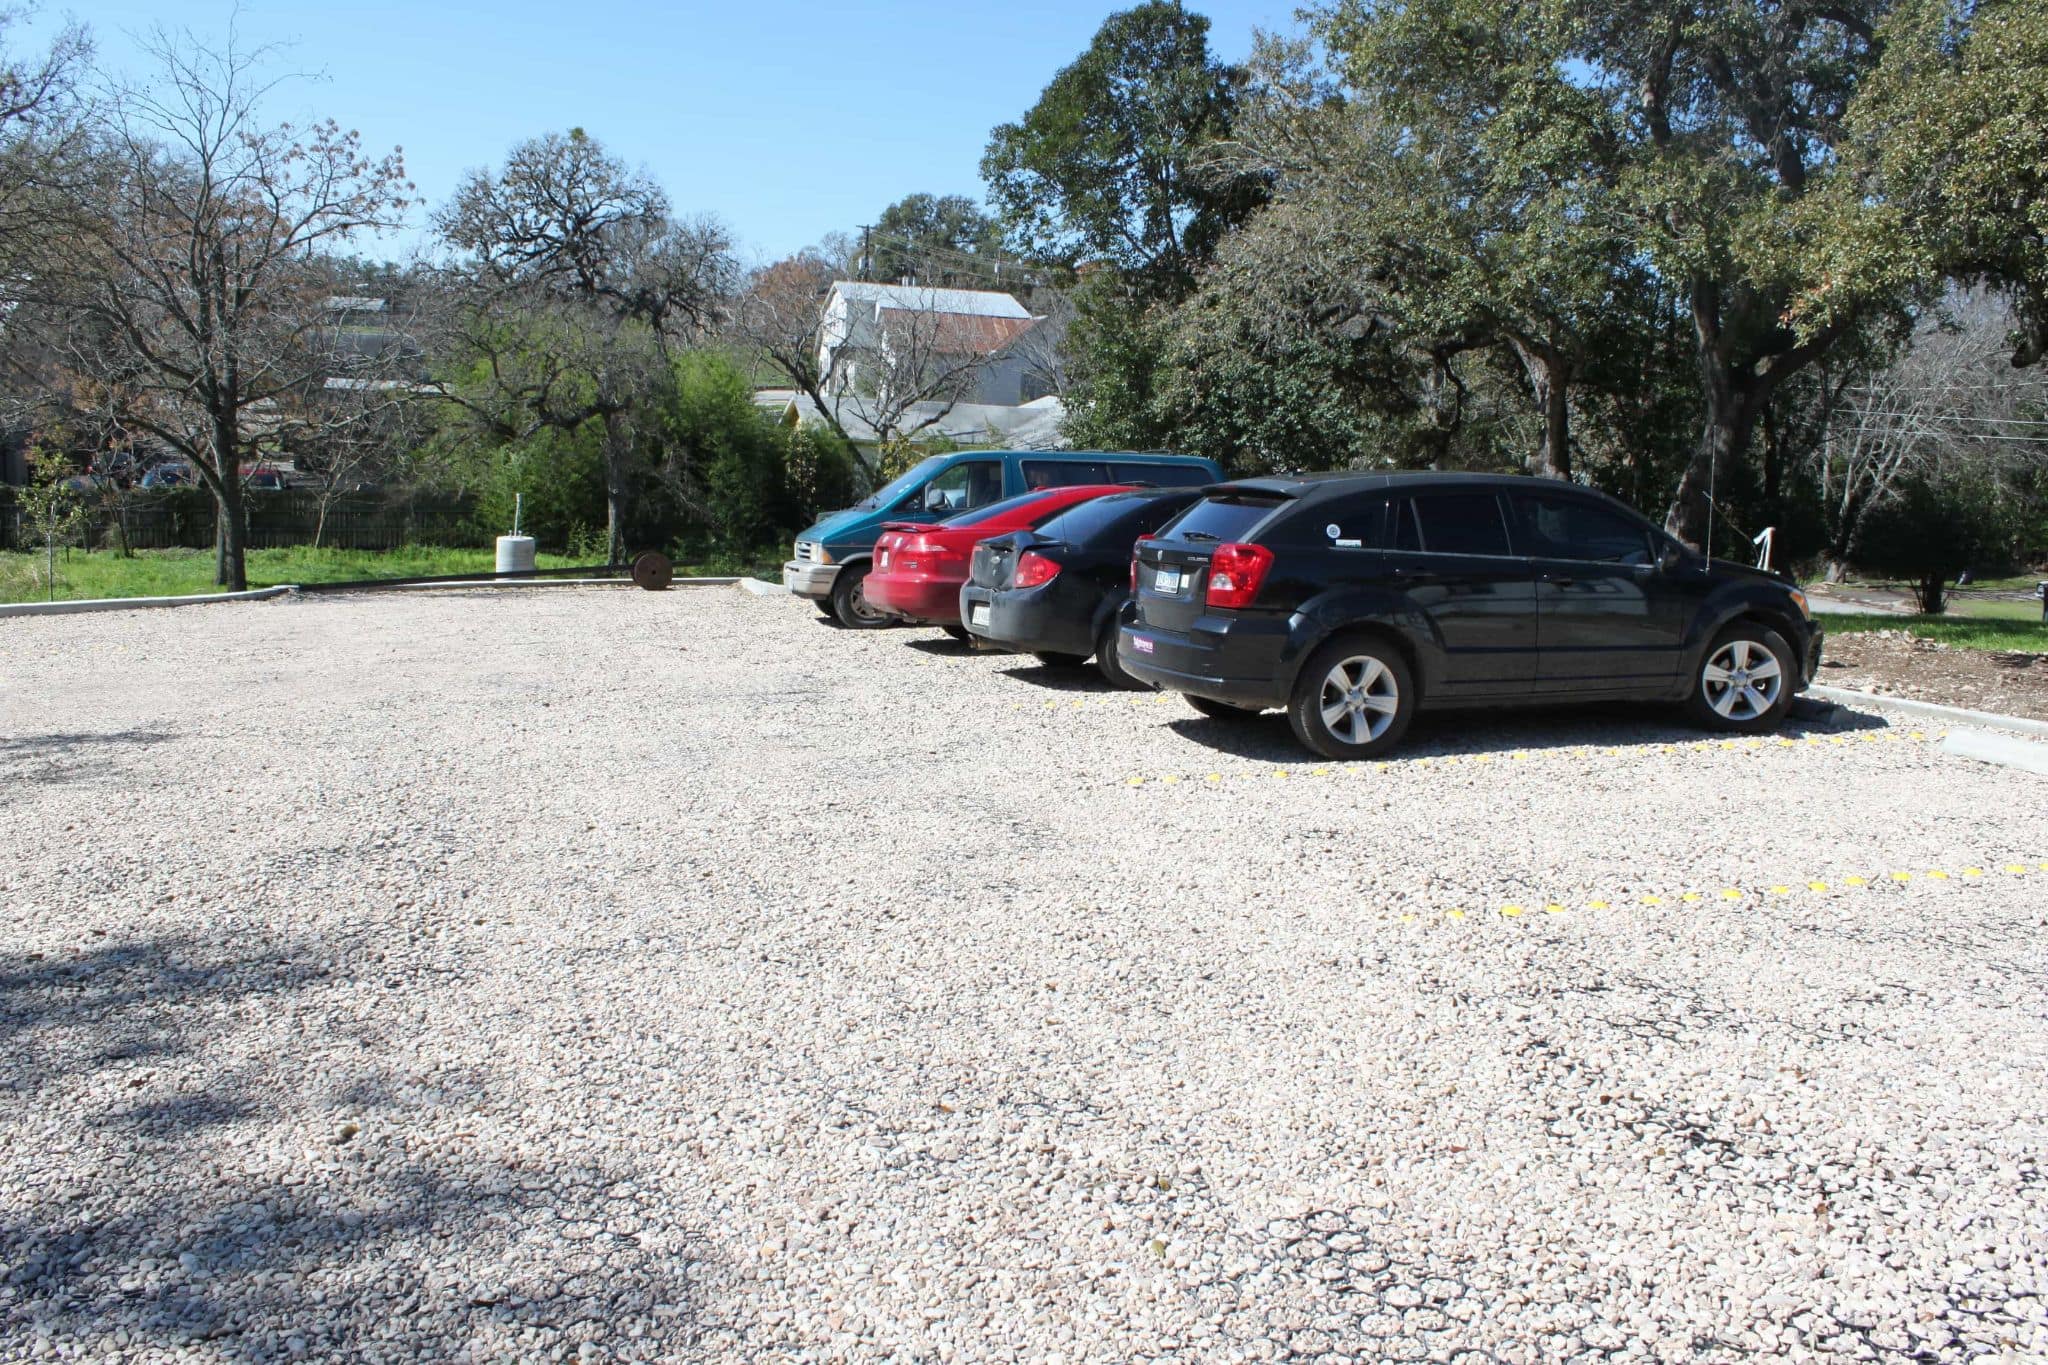 The Easiest Way to Design a Church Parking Lot